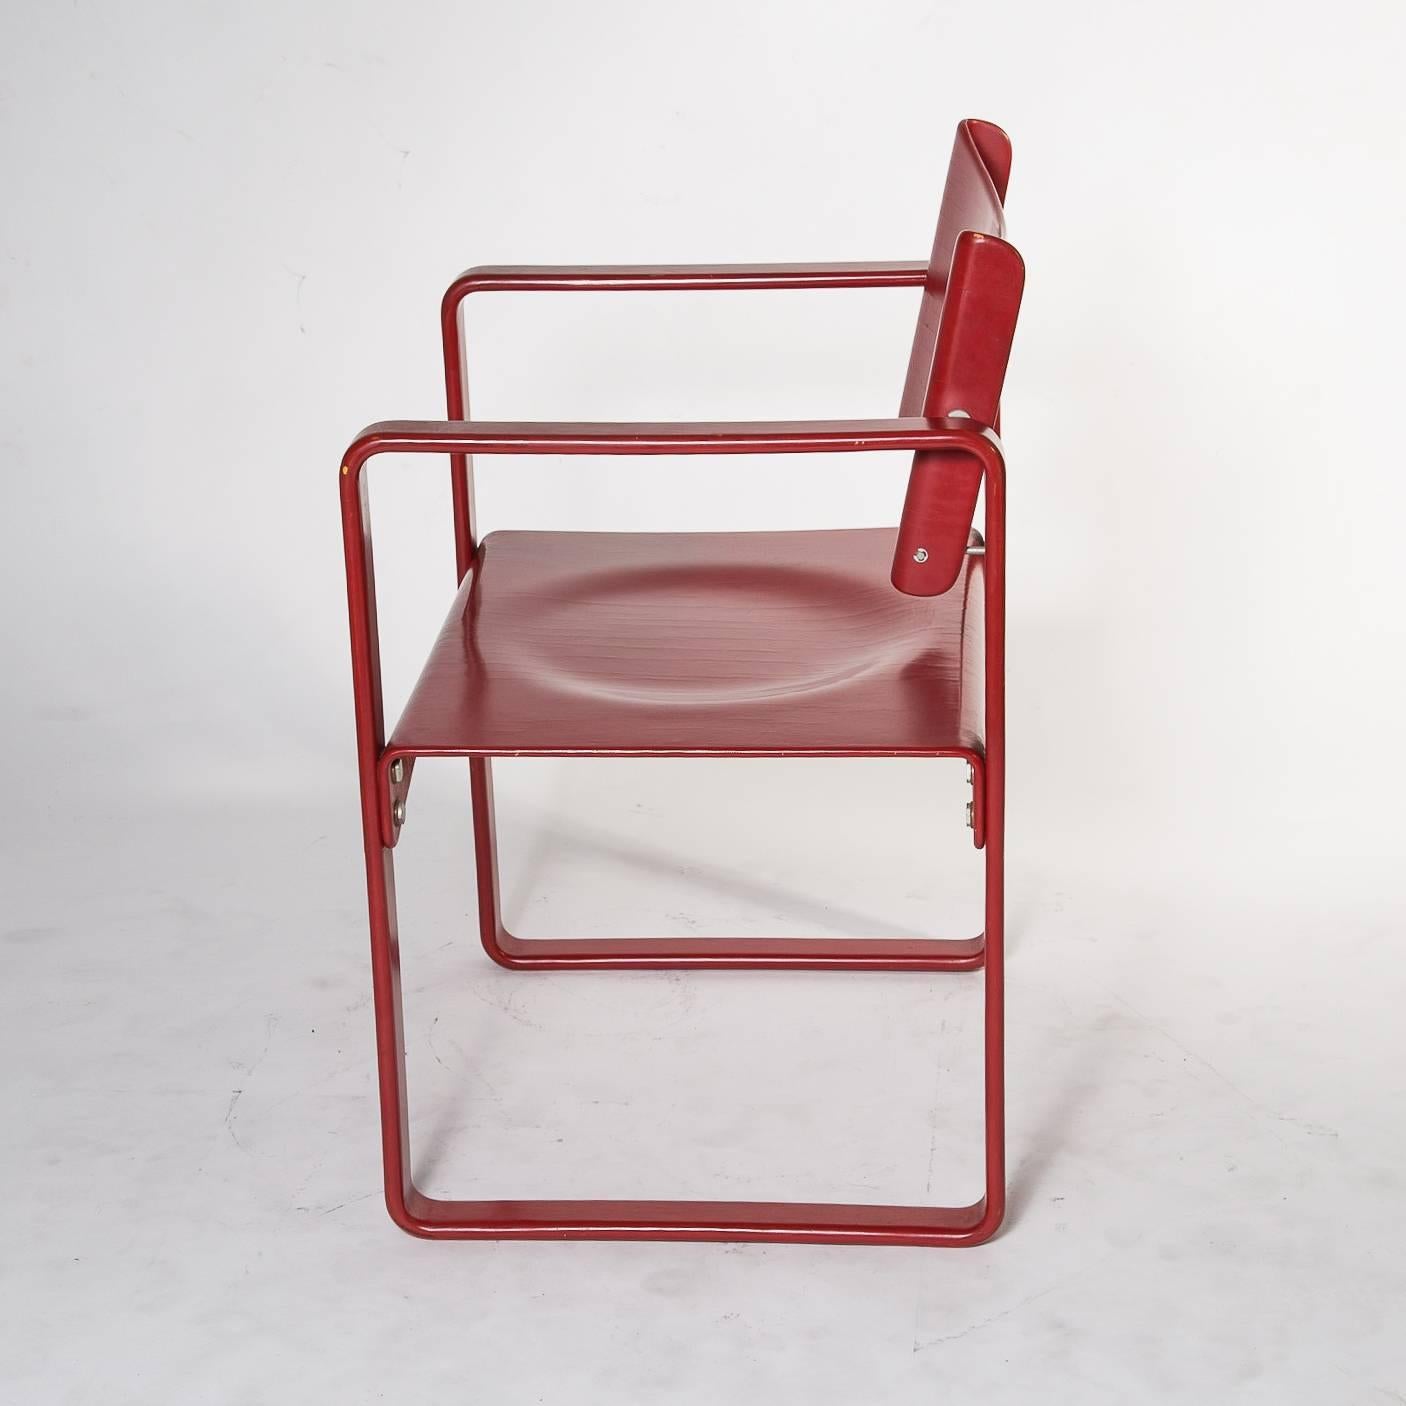 International Style Red Verner Panton No. 271 Dining Chair for Thonet, Germany, circa 1970 For Sale